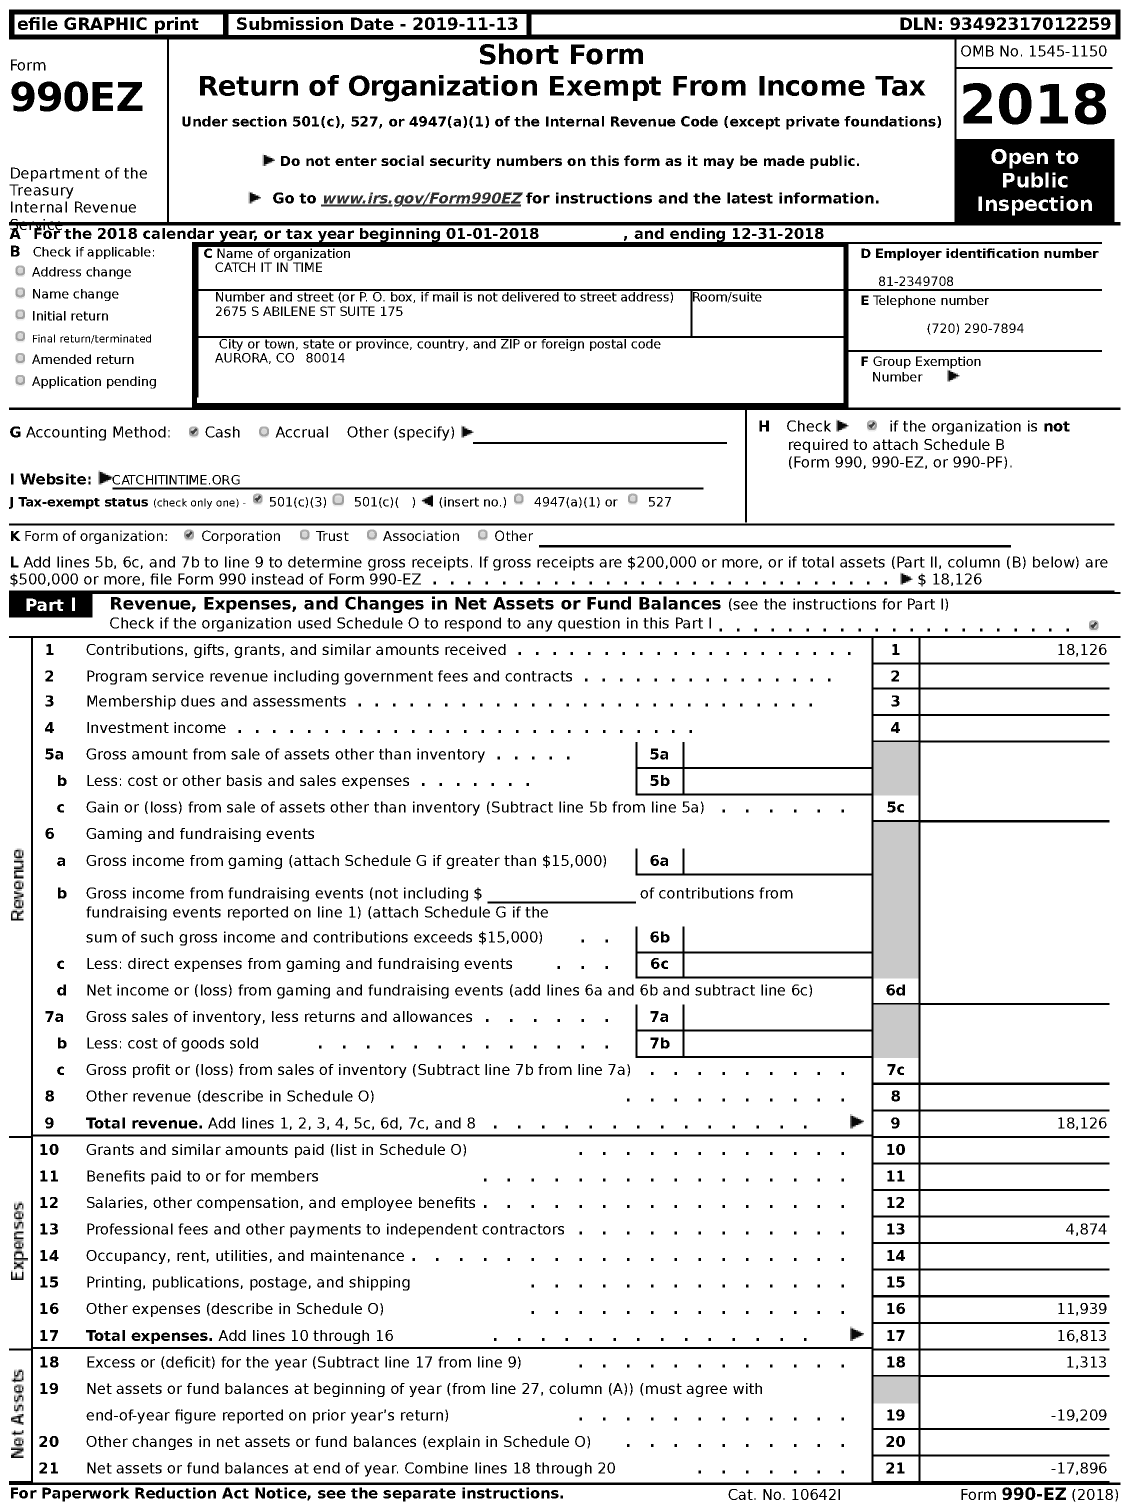 Image of first page of 2018 Form 990EZ for Catch It in Time